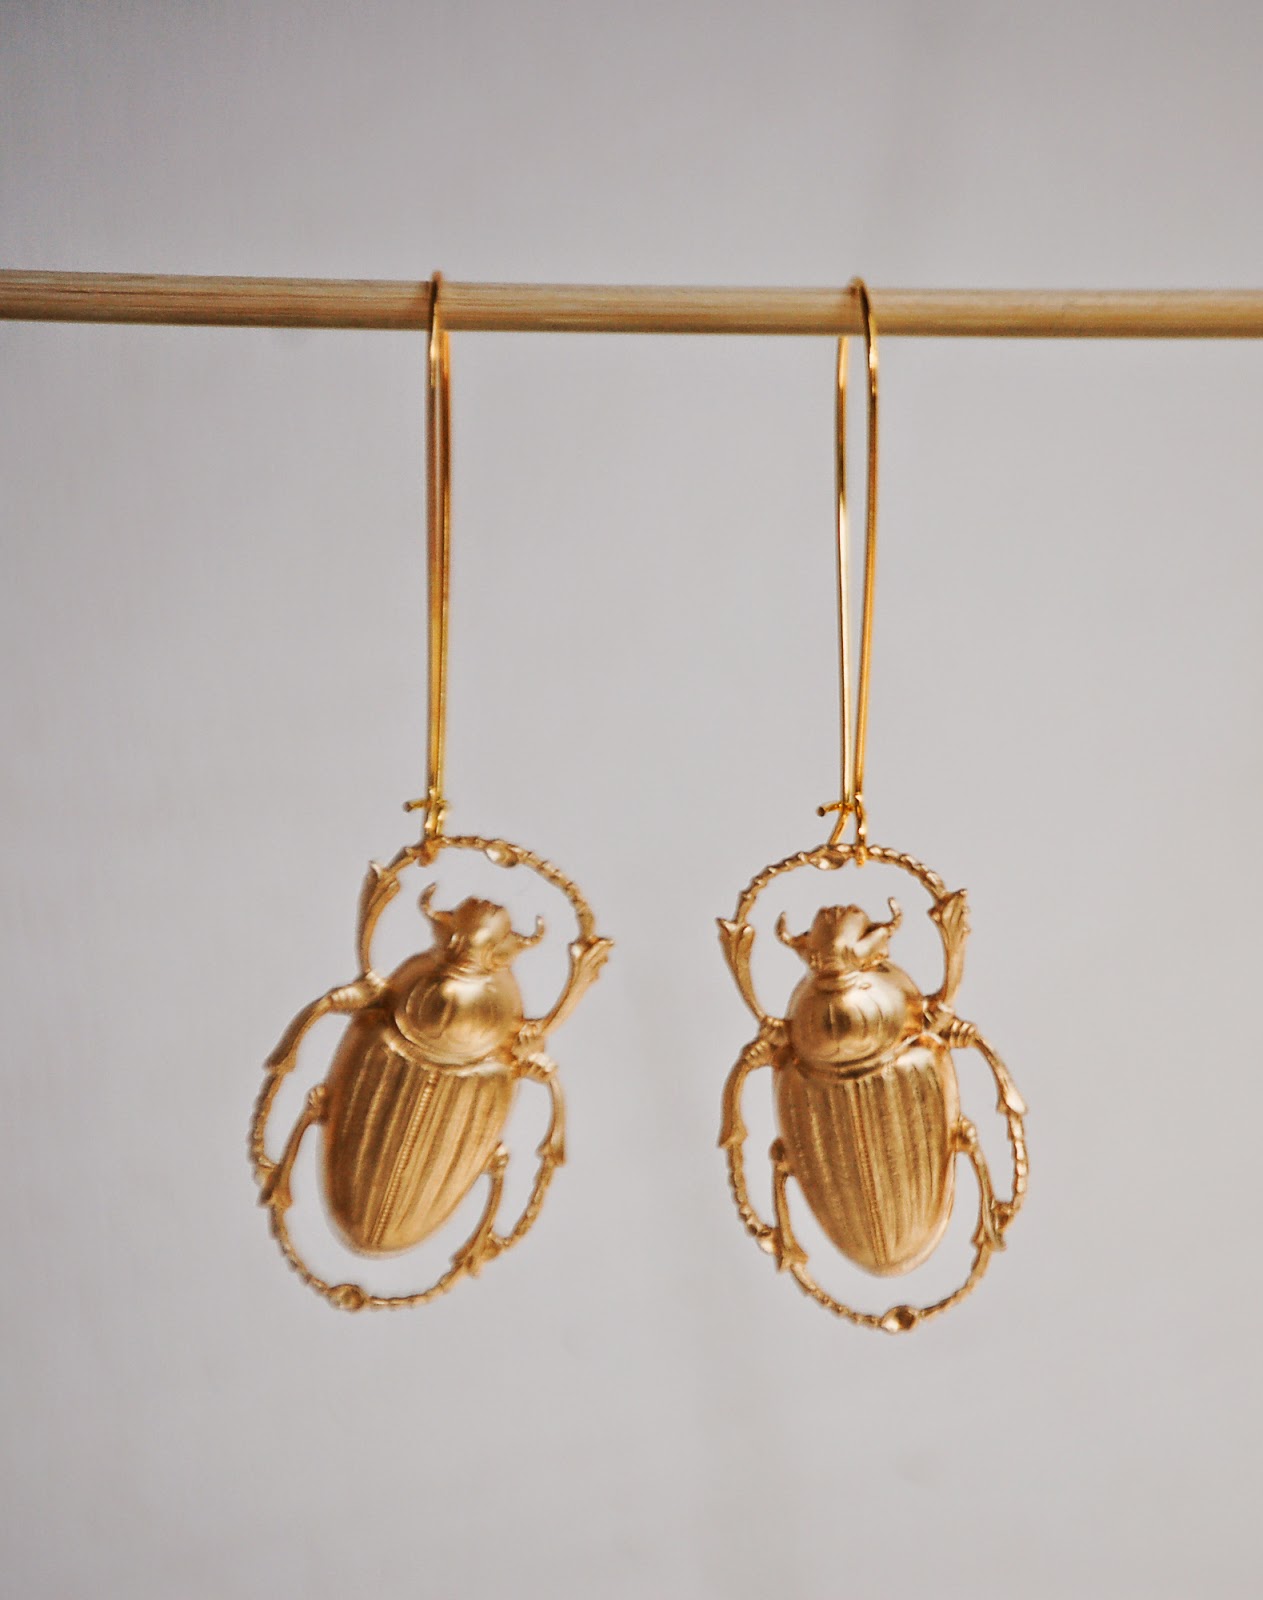 https://www.etsy.com/listing/226803713/gold-beetle-earrings-nature-study?ref=shop_home_active_2&ga_search_query=beetle